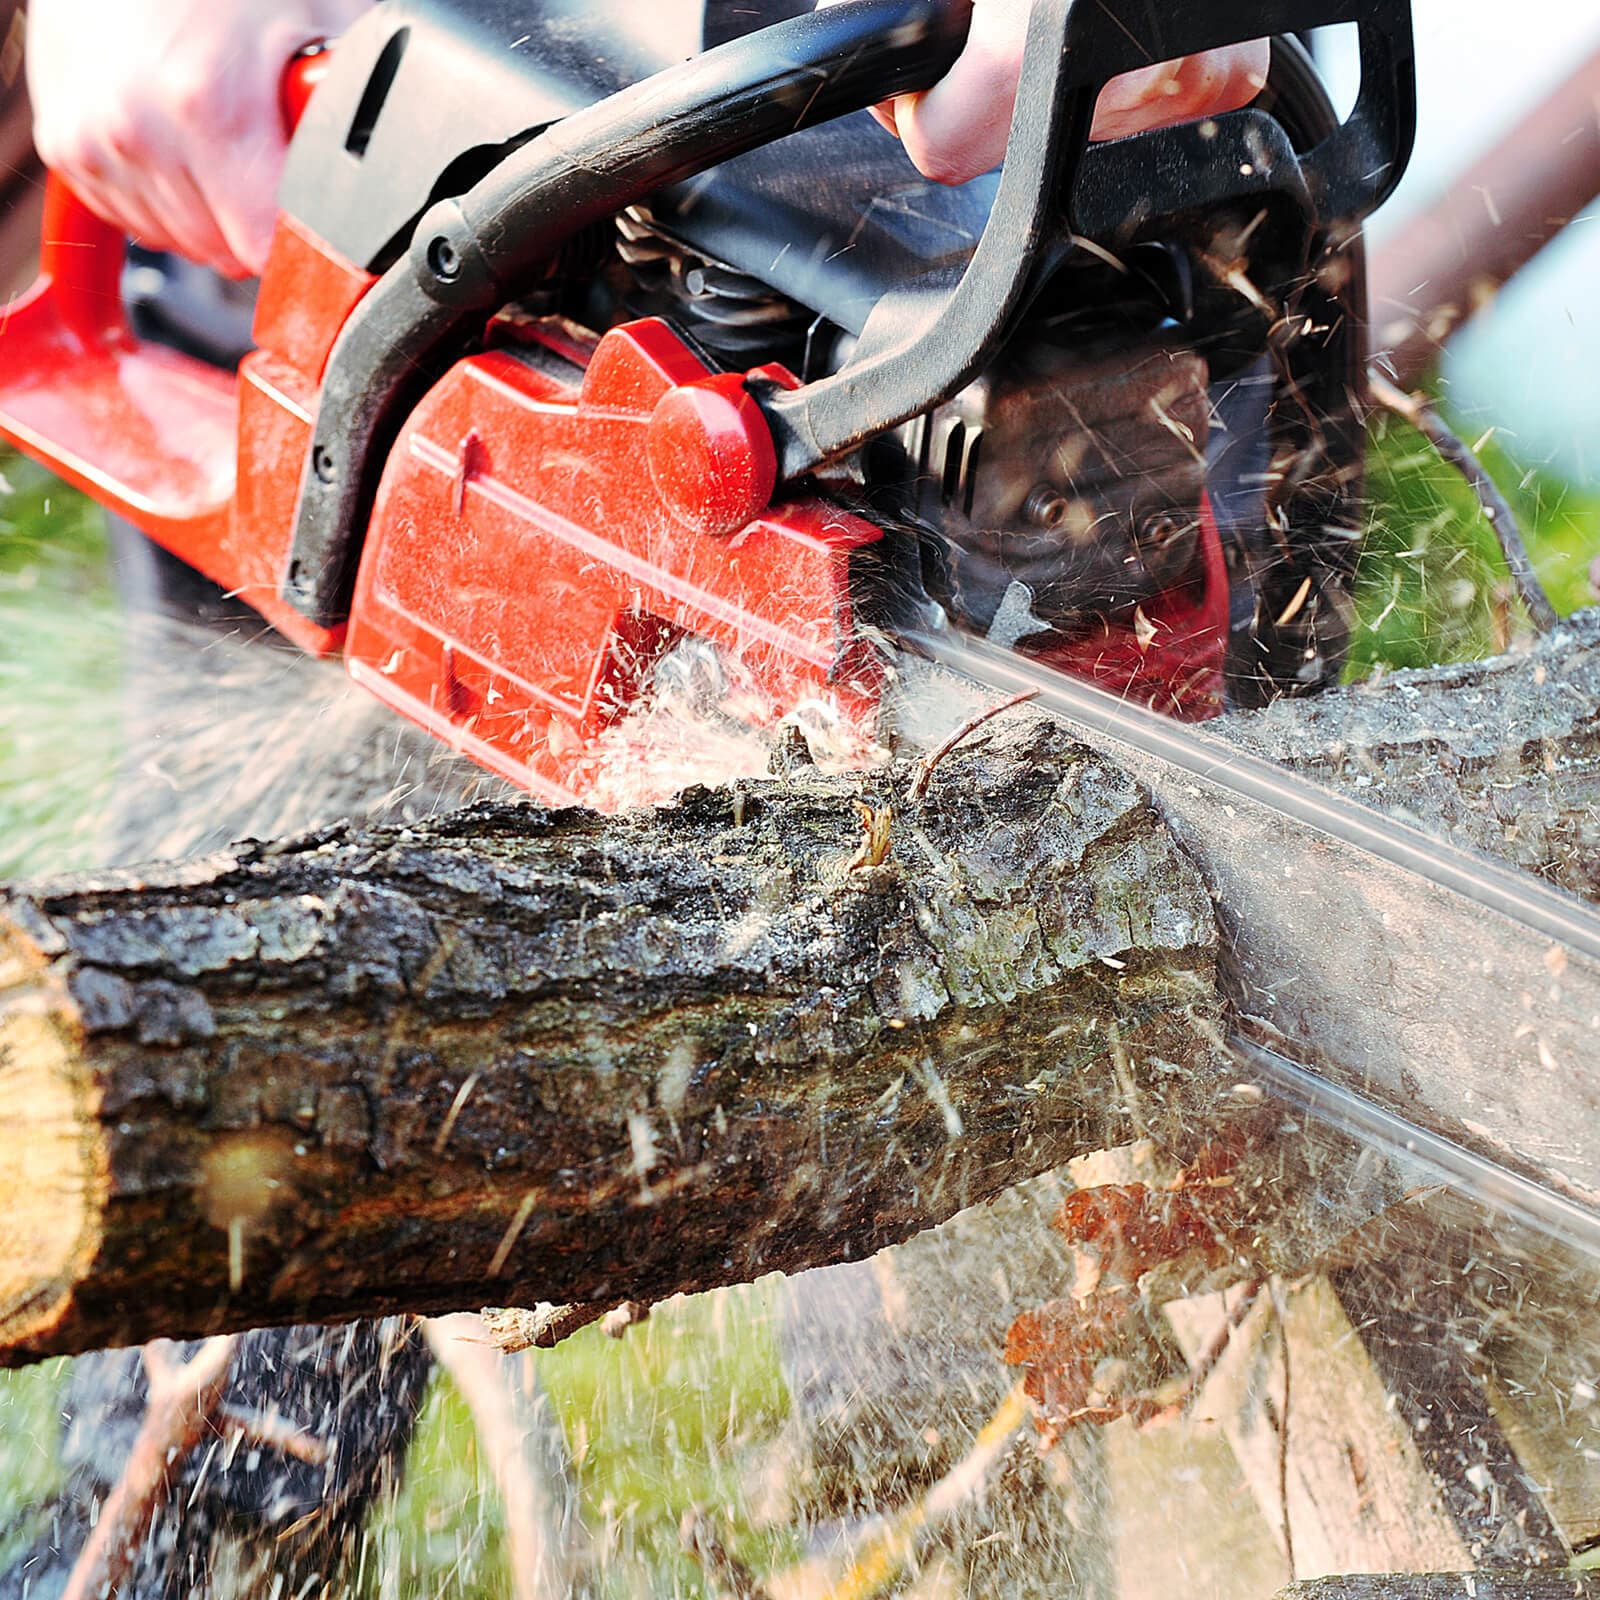 Best Cordless Electric Chainsaws: Cut Wood Quickly and Efficiently